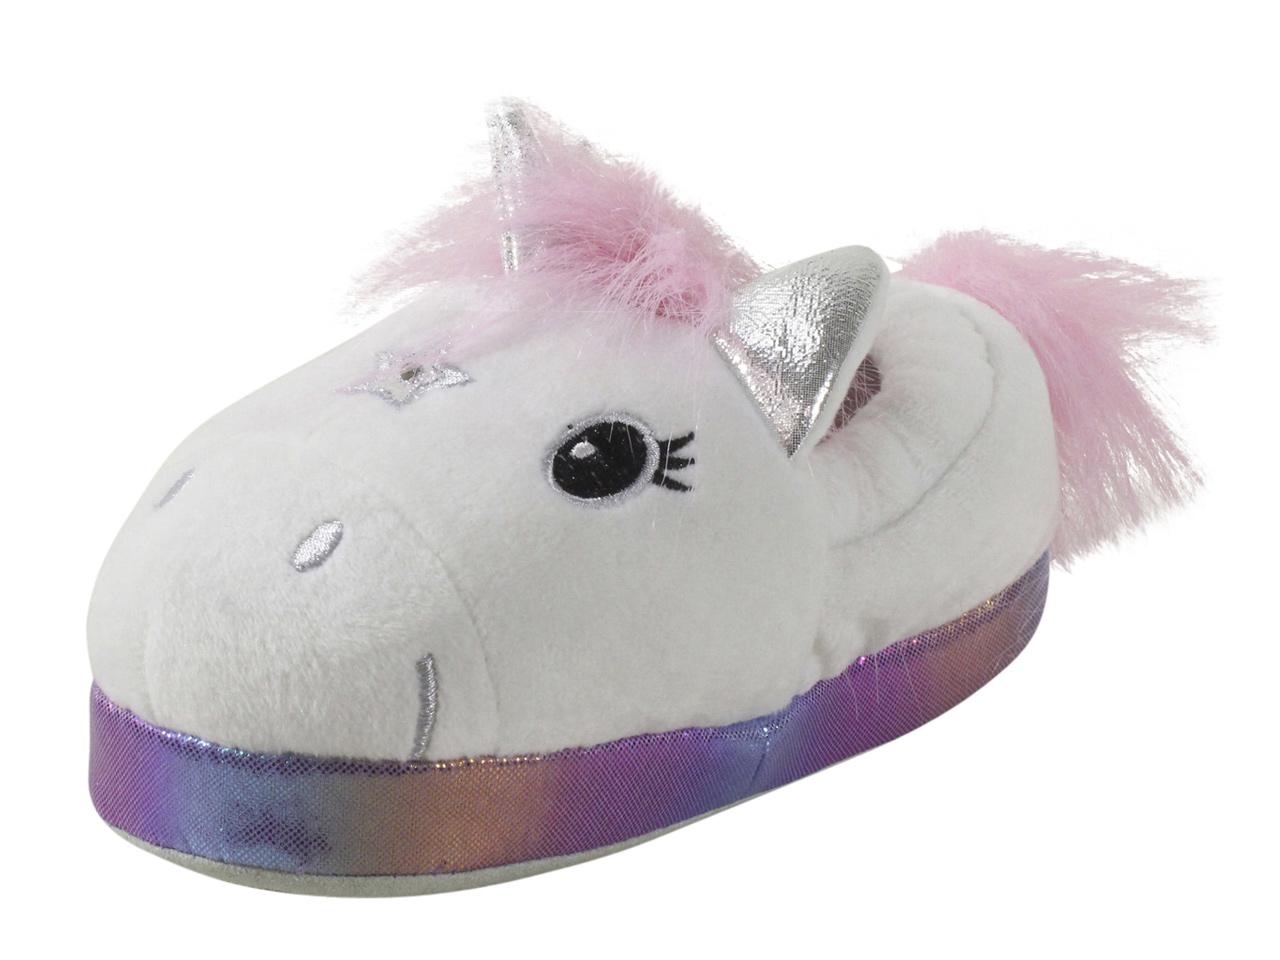 Molly Light Up Unicorn Slippers Shoes